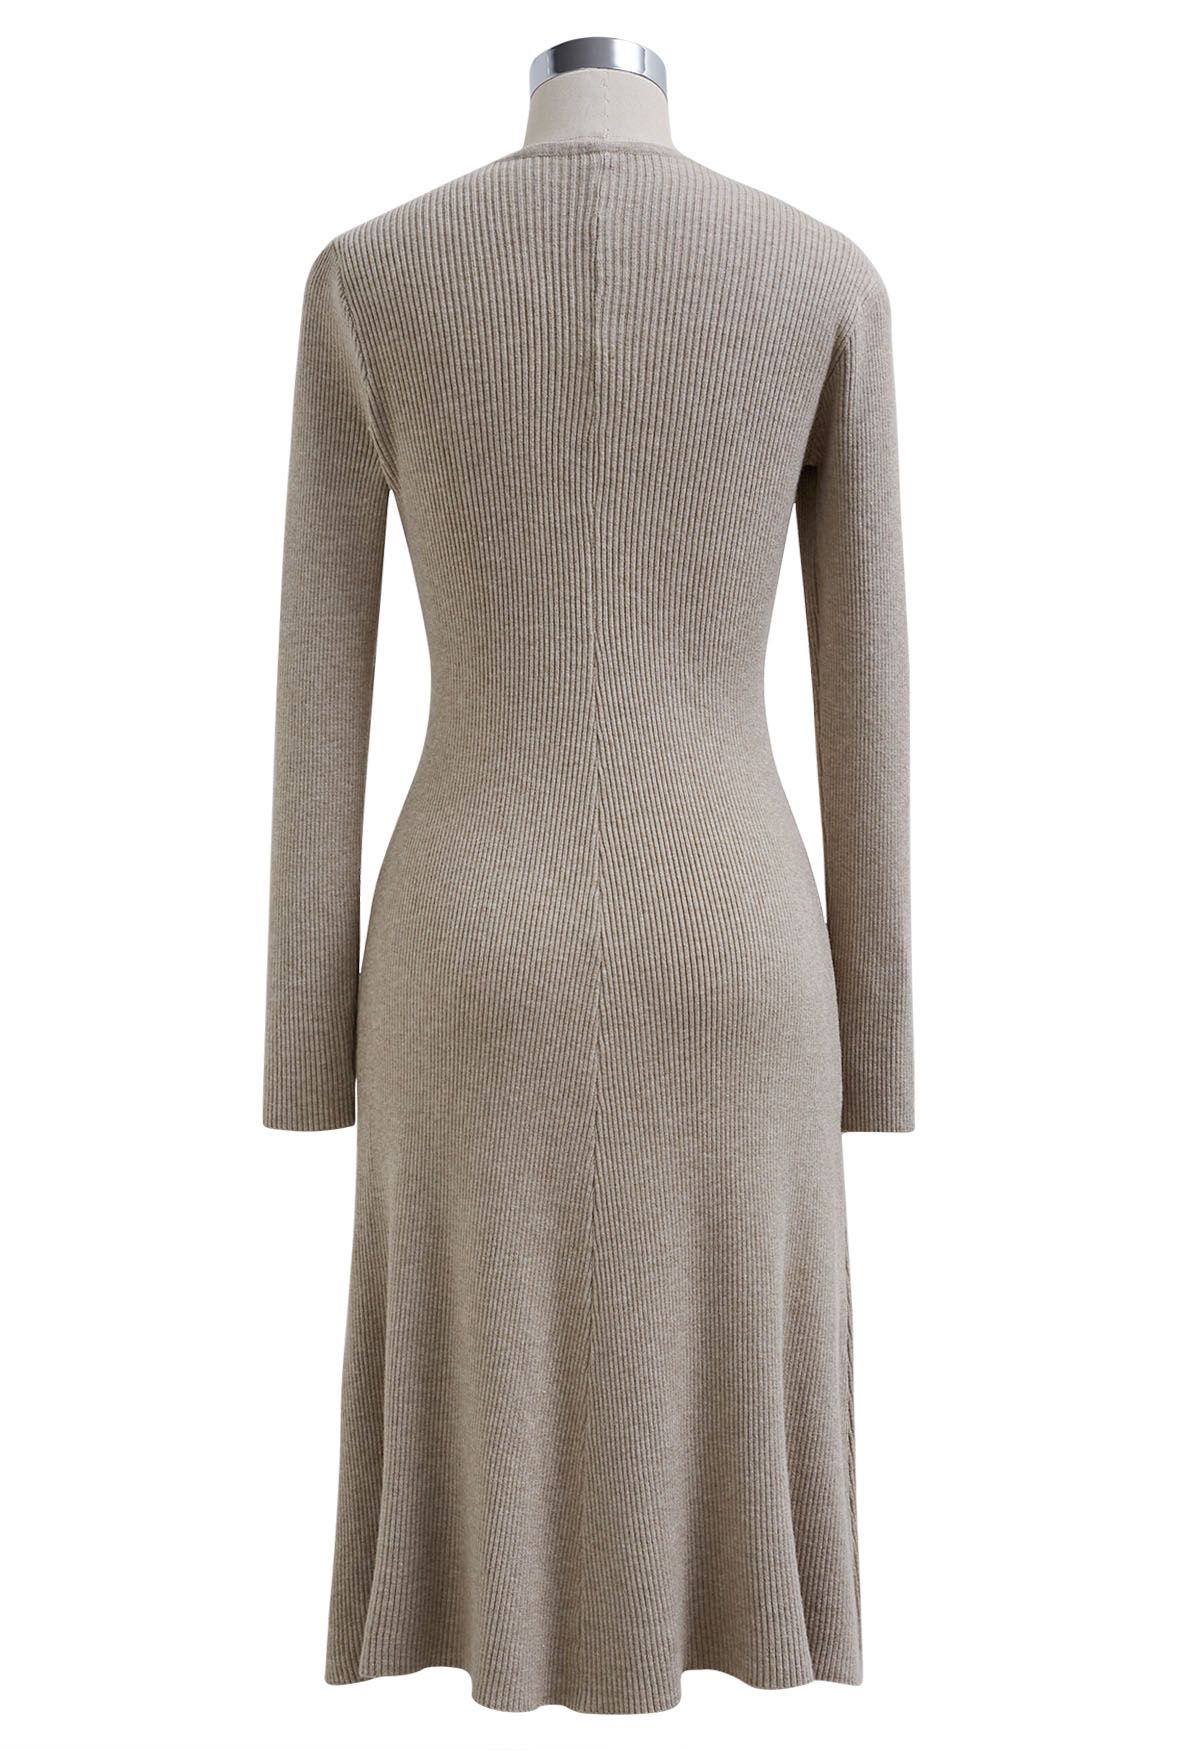 Cross Waist Detail Faux-Wrap Knit Dress in Oatmeal - Retro, Indie and Unique  Fashion